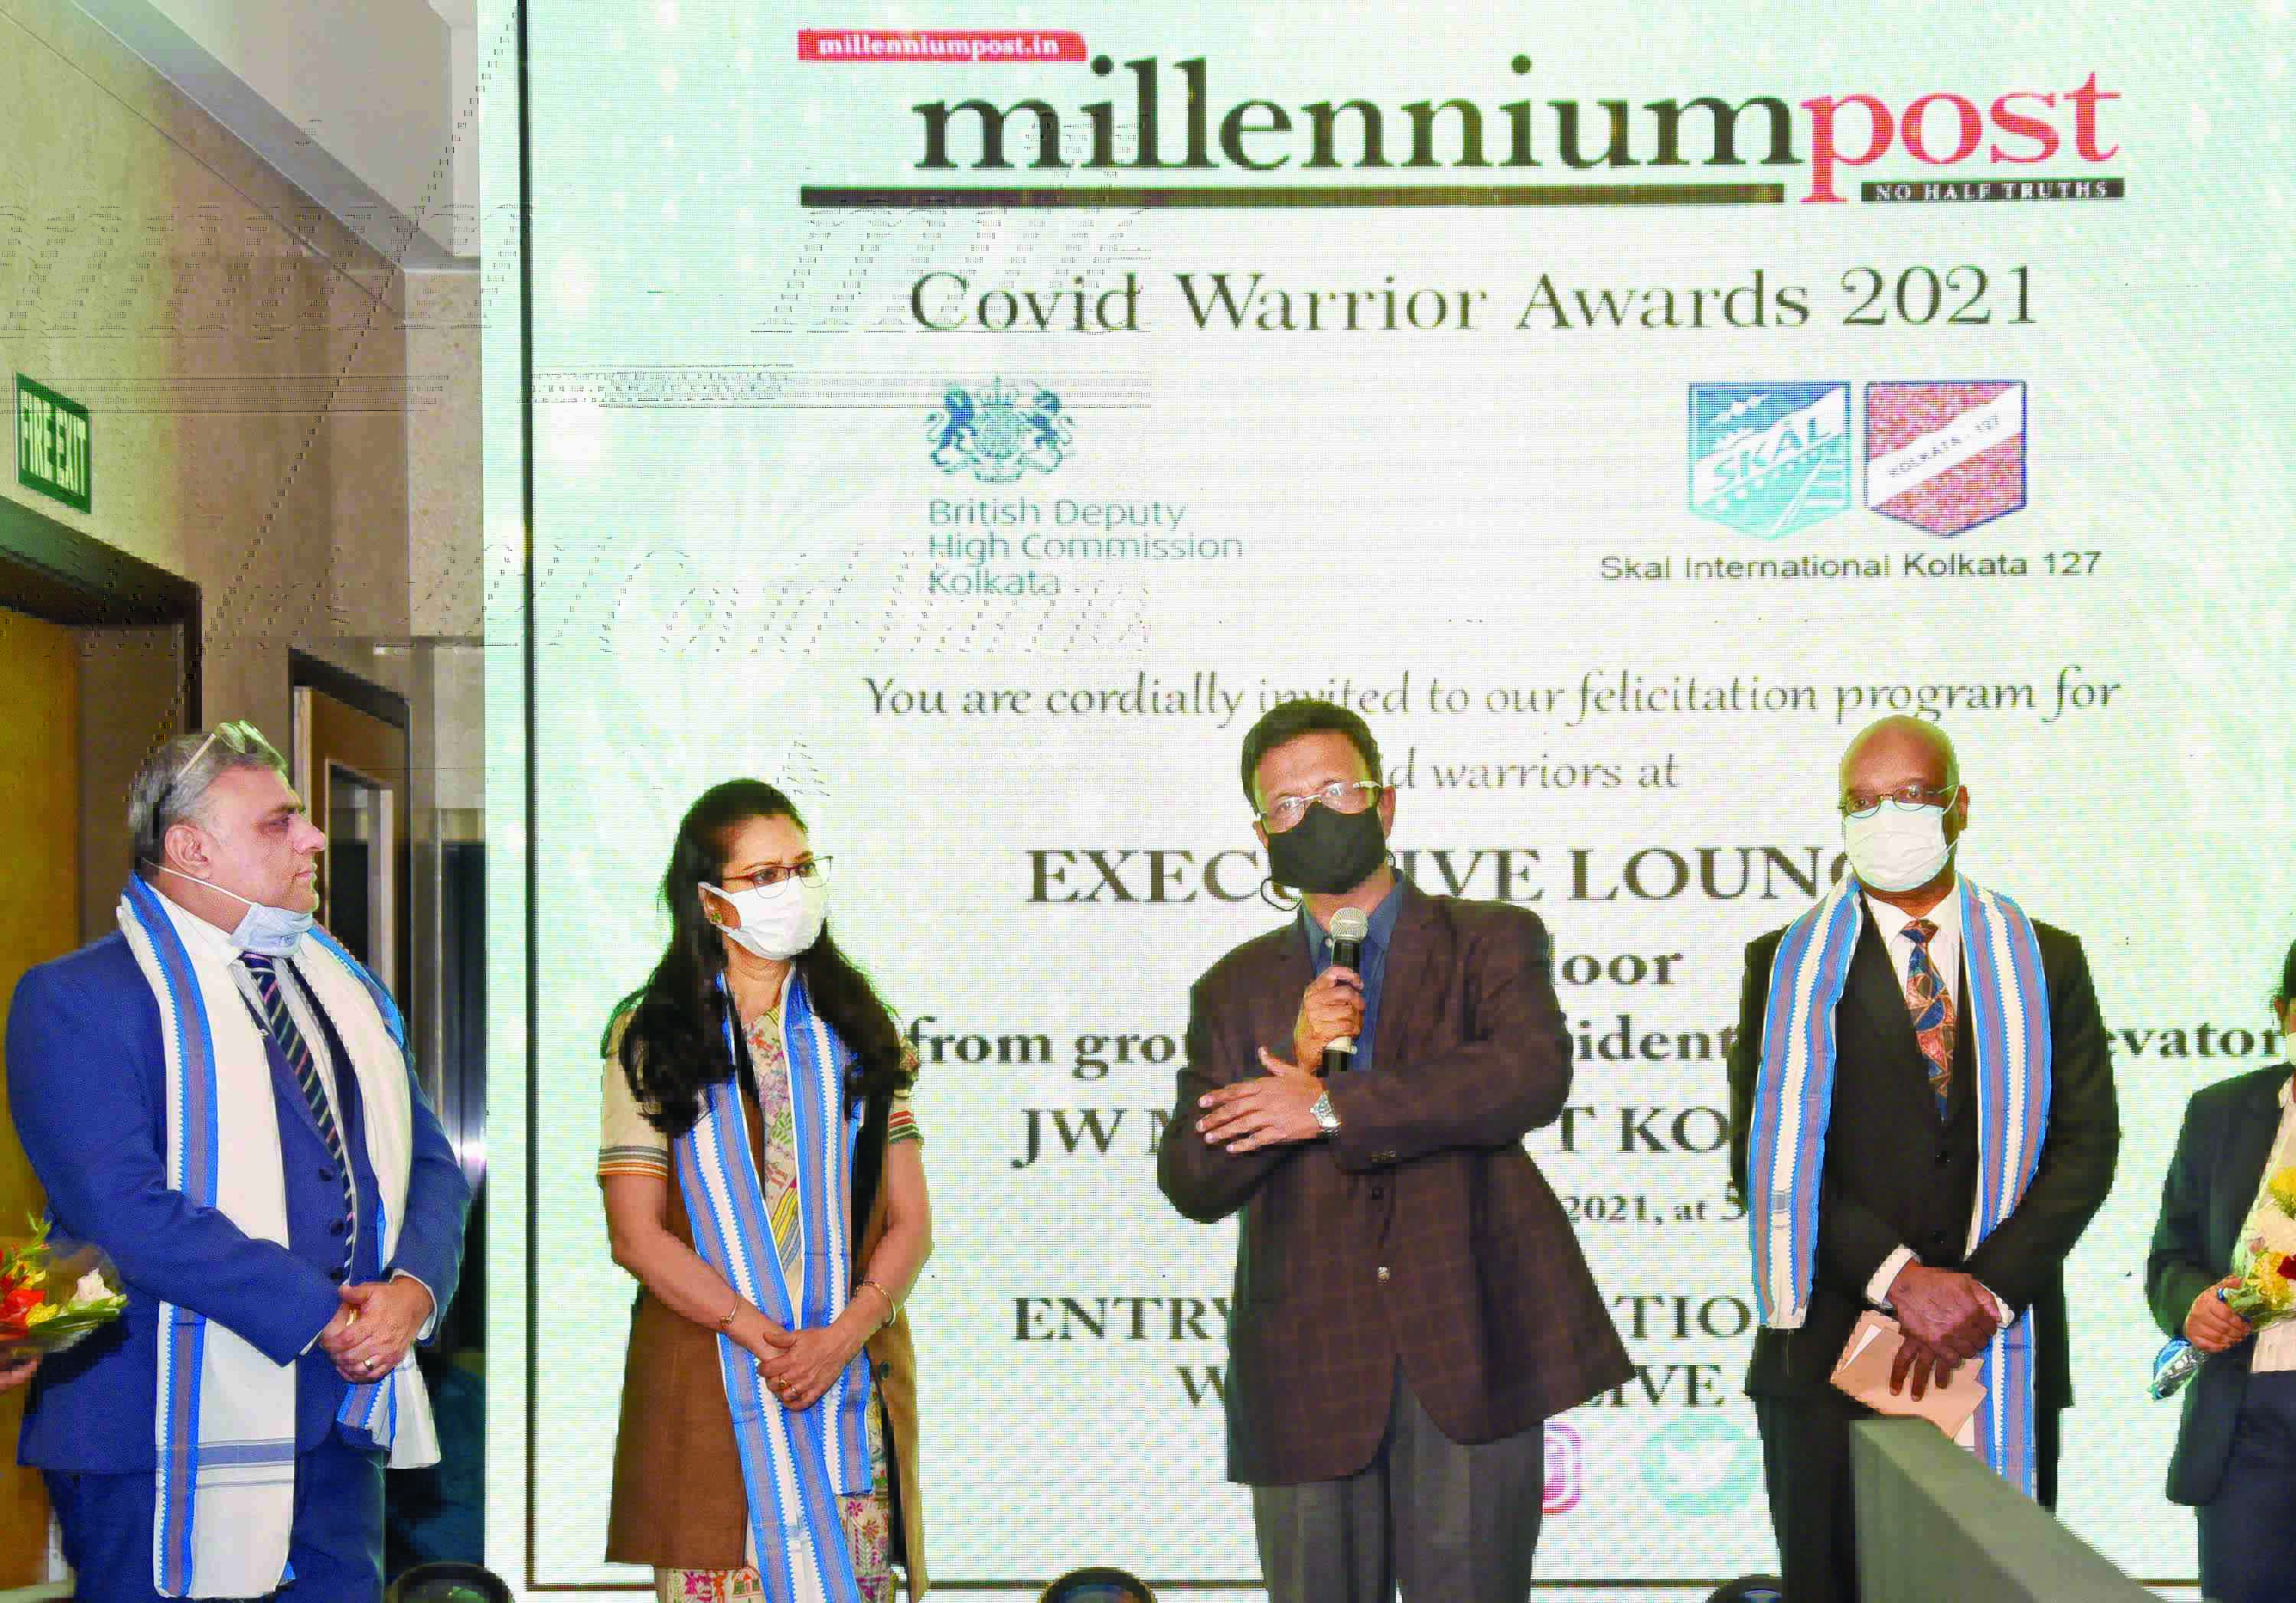 Millennium Post has honoured Covid warriors who never came into limelight, says Hakim